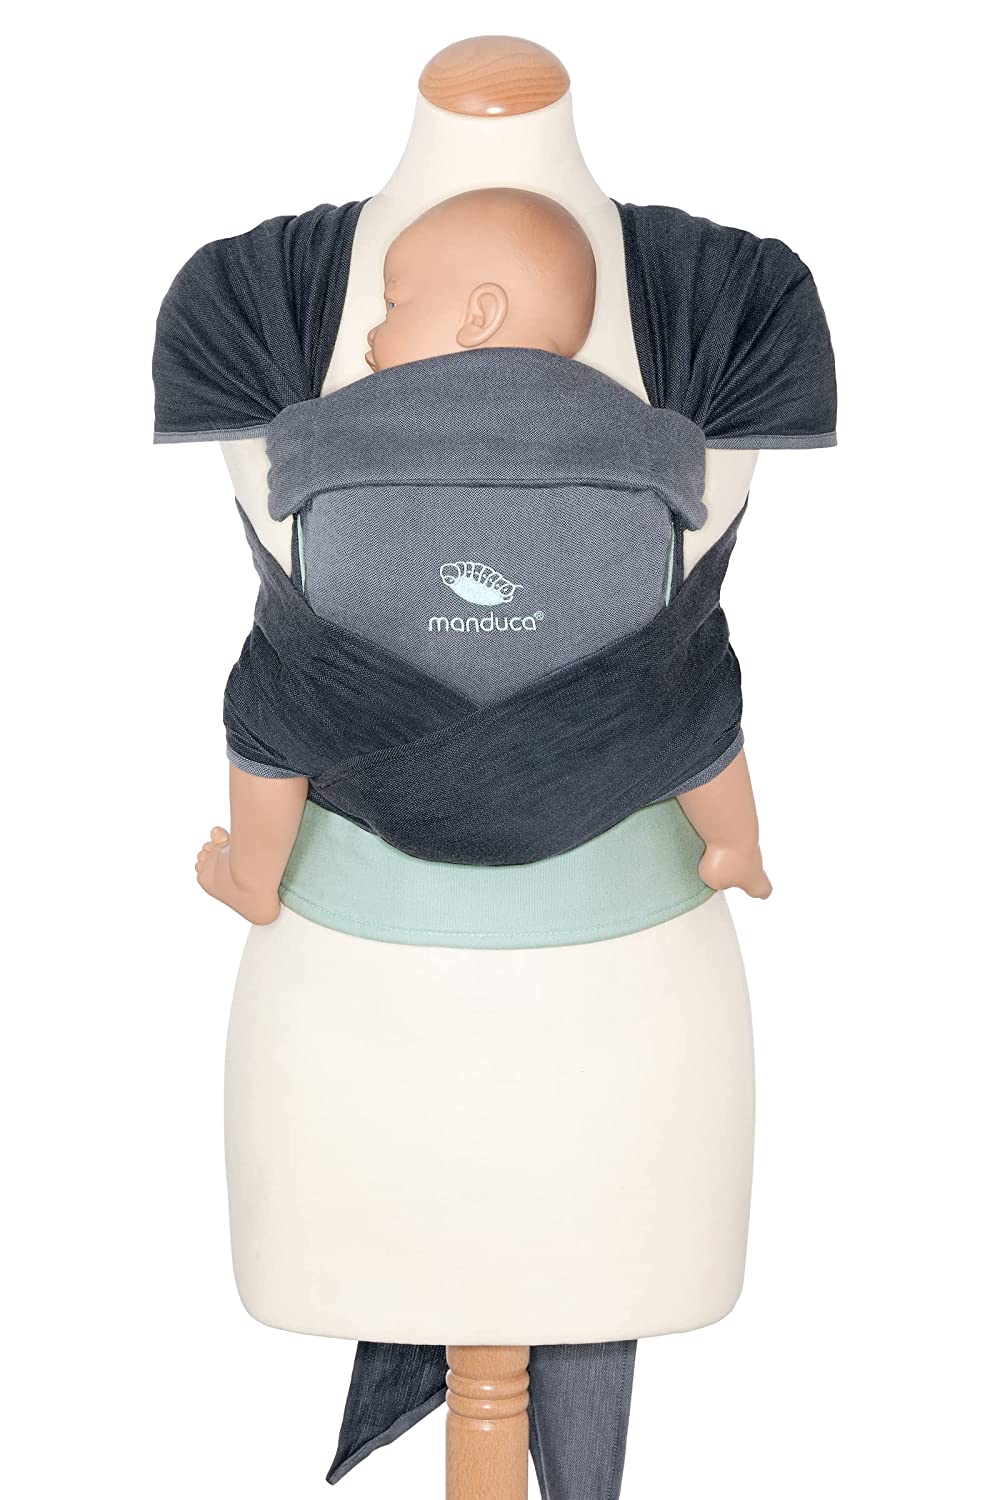 manduca Twist Baby Carrier > < Newborn Carrier Made of Sling Fabric (Organic Cotton) I Soft Belly Strap I Fan Straps (Baby Wrap Conversion) (Twist Long, Grey-Mint)